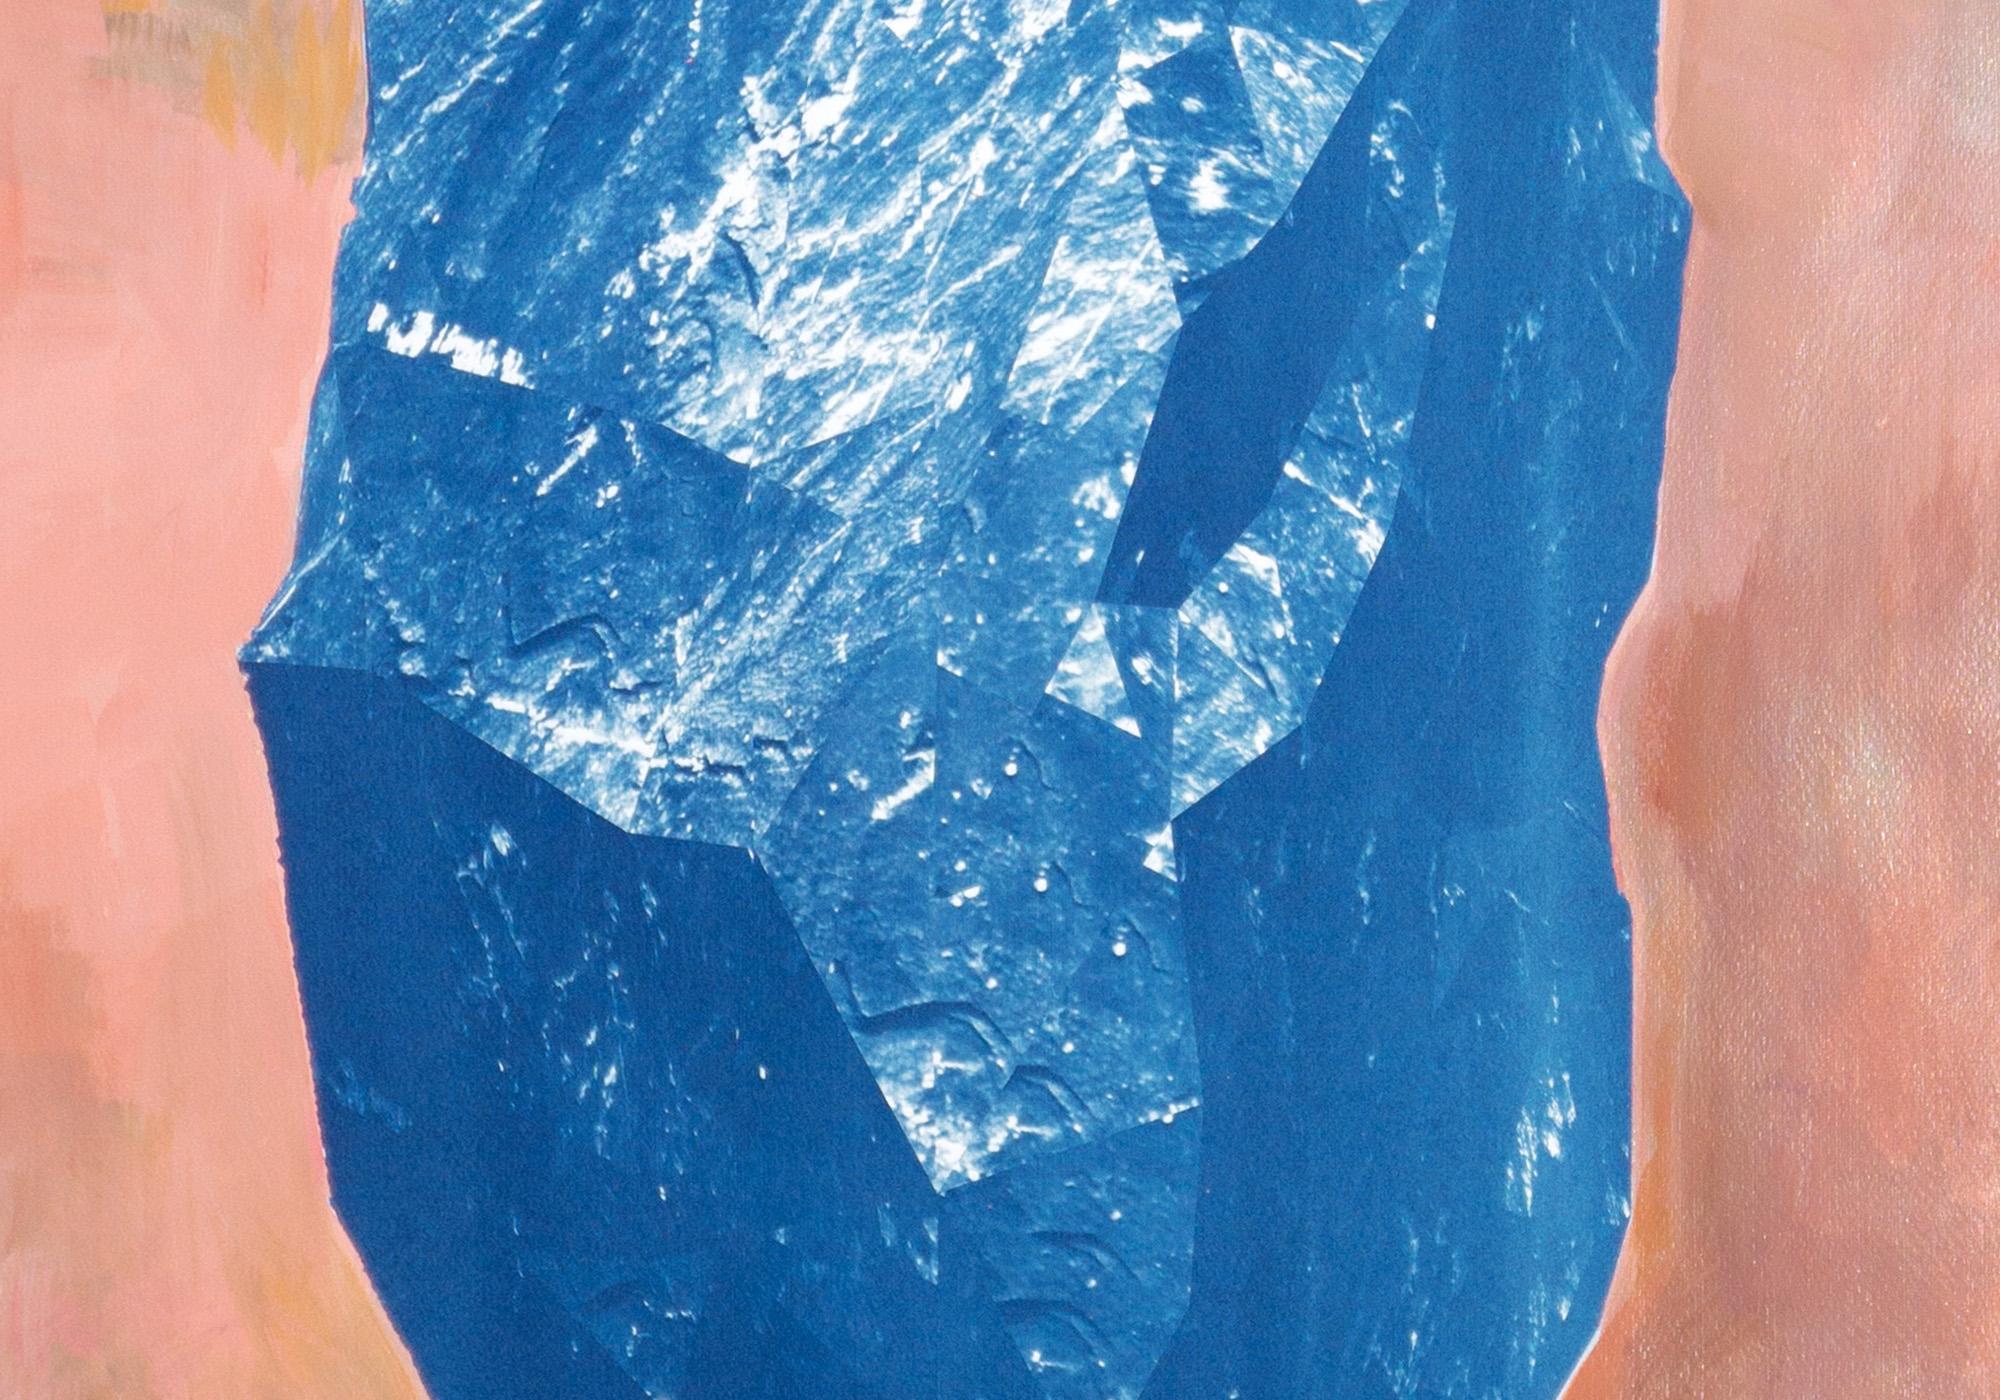 Blue Boulder on Pink, Cyanotype and Painting on Watercolor Paper, Burnt Orange   2